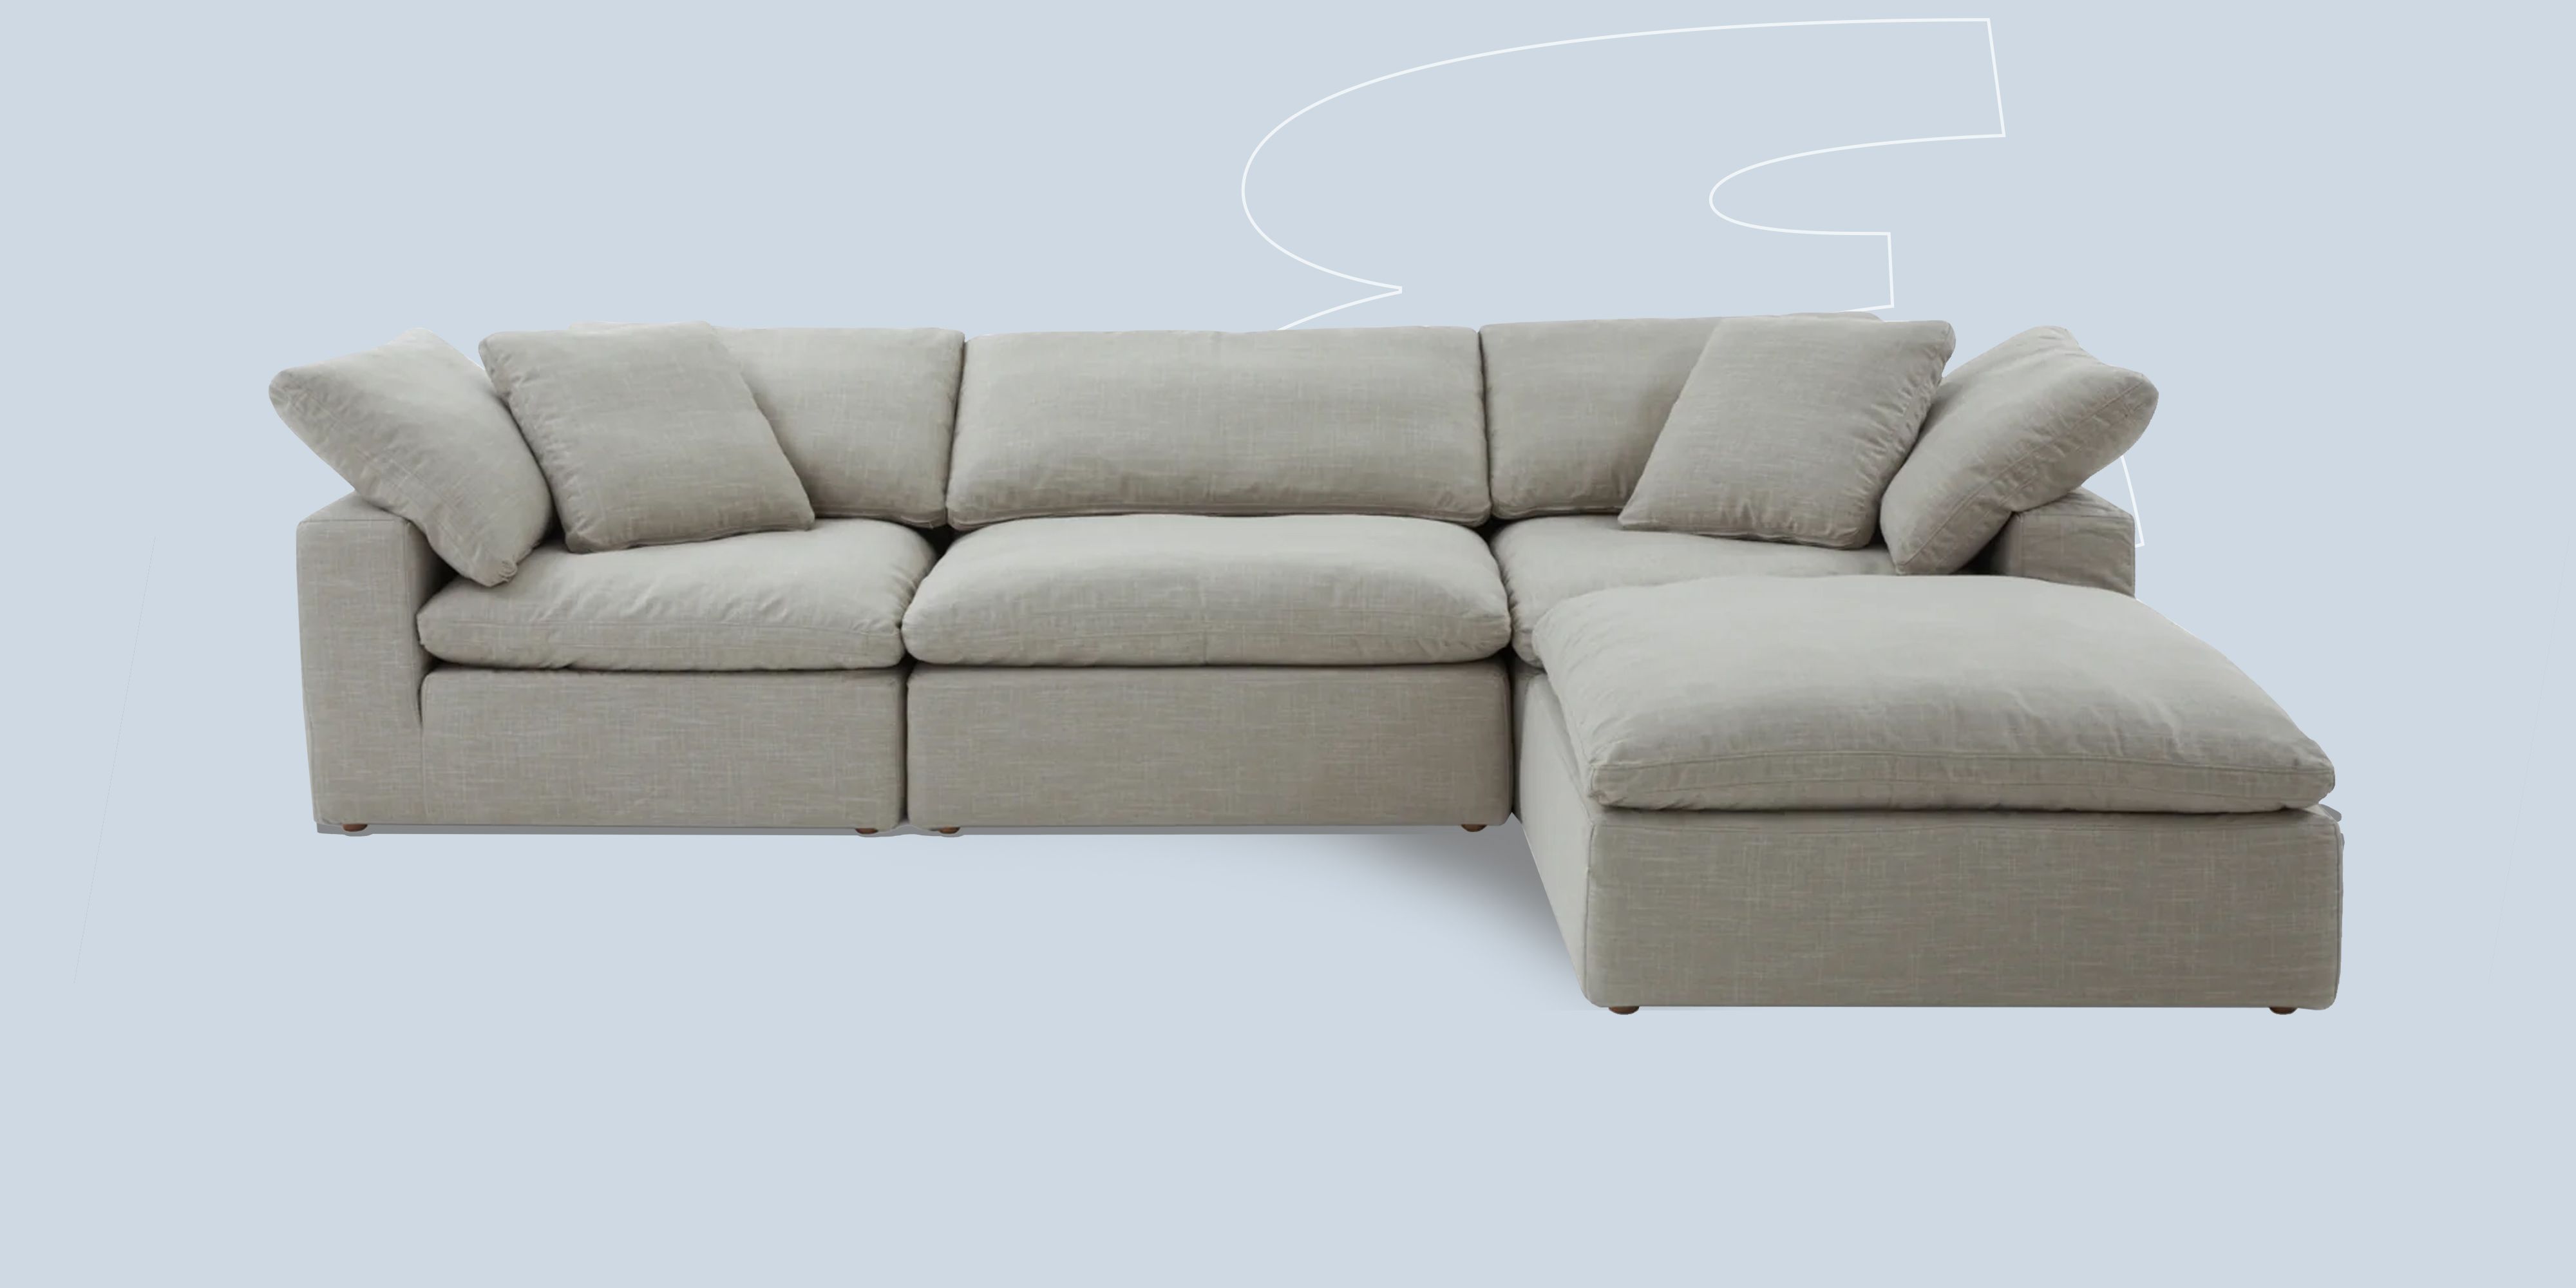 Index Couch 6464f6bb90f6a 